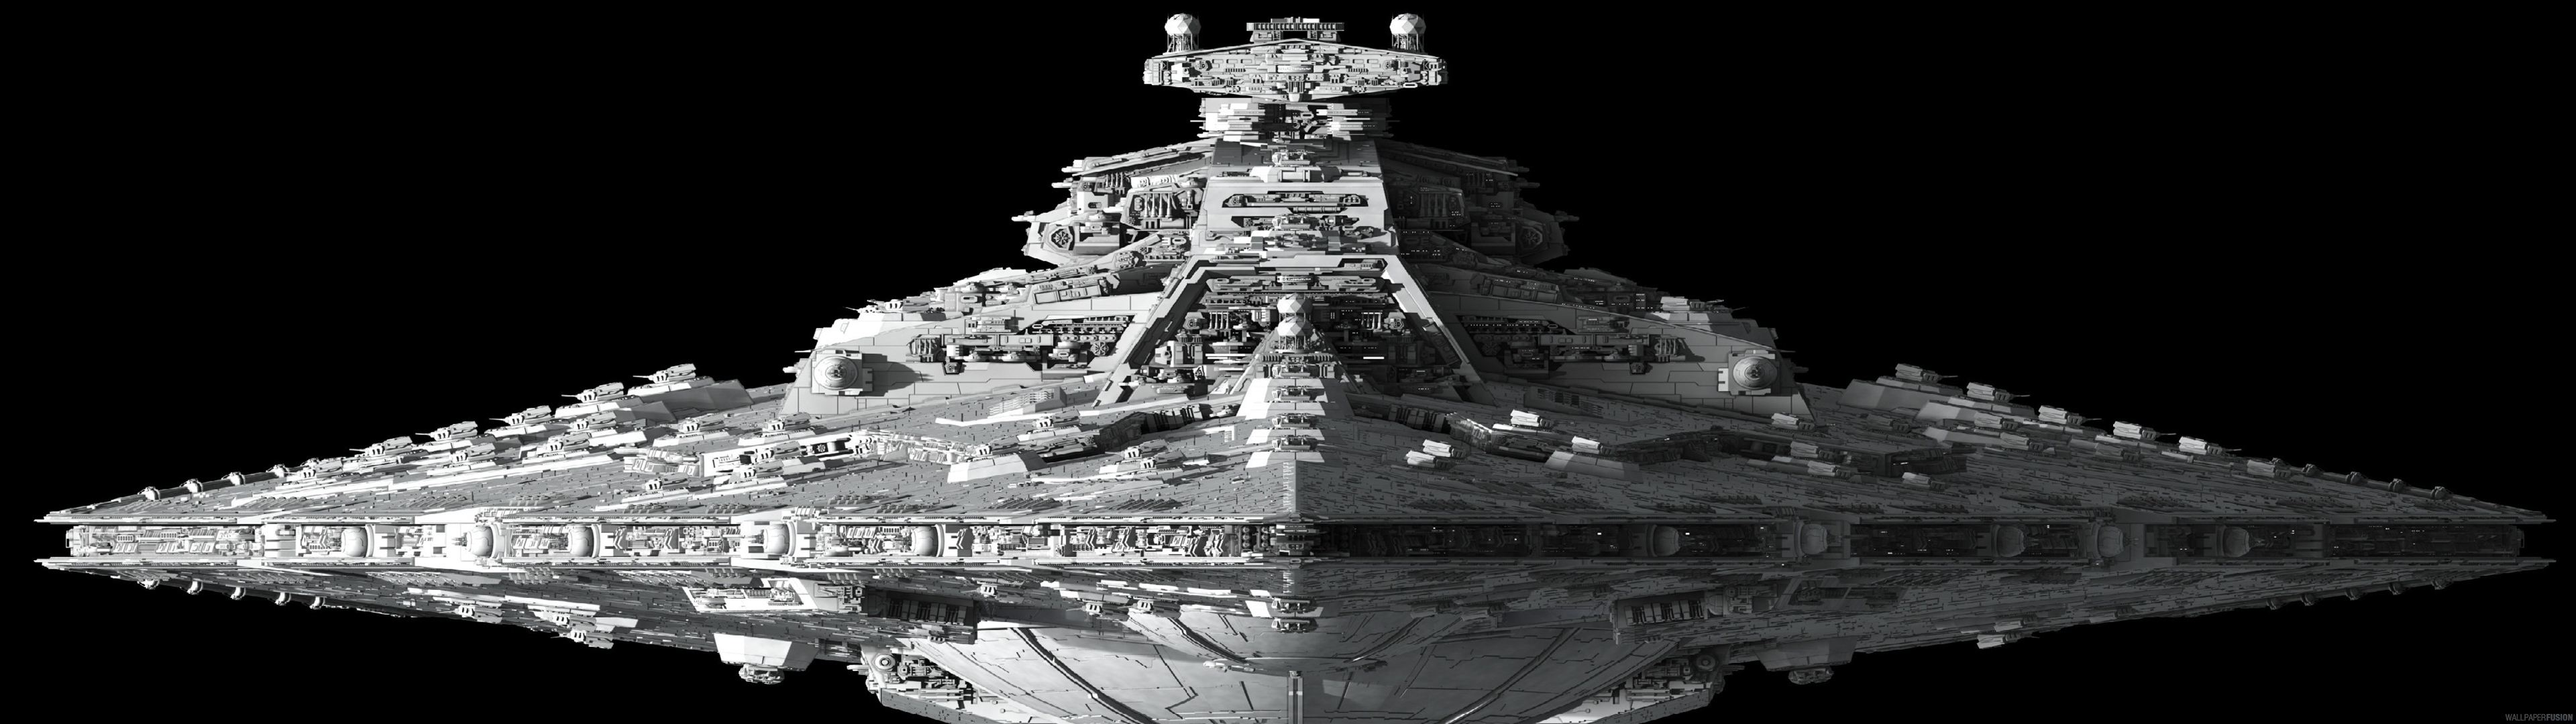 Dual Monitor Star Destroyer Wallpaper Ment Added By